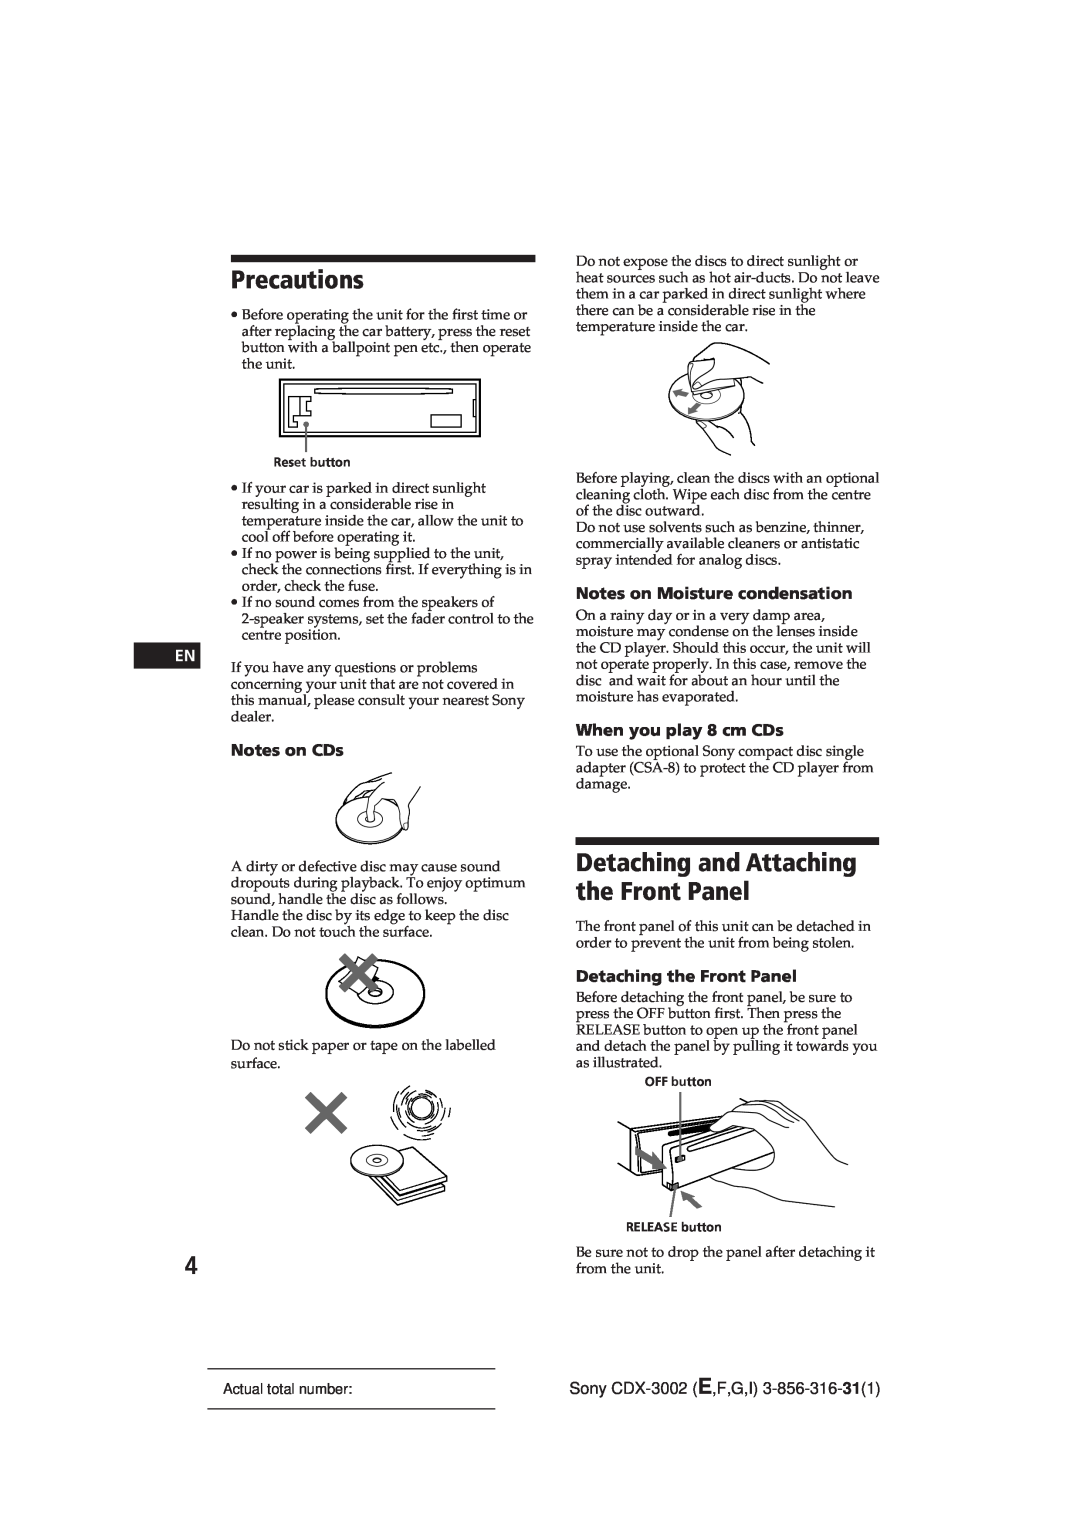 Sony CDX-3002 manual Precautions, Detaching and Attaching the Front Panel, Notes on CDs, Notes on Moisture condensation 